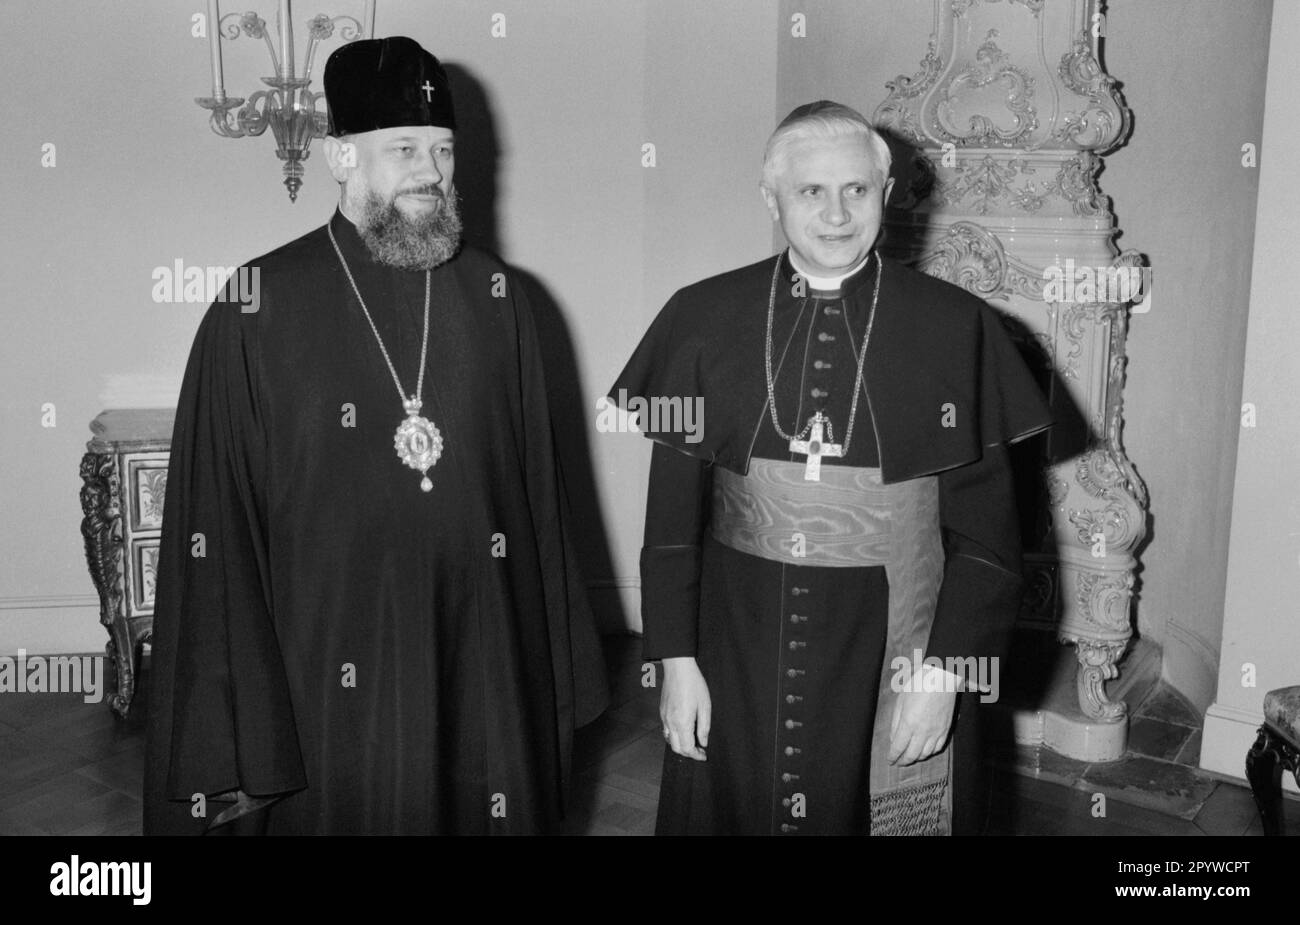 The Russian Orthodox Archbishop of Sagorsk Vladimir Dimitroskoy and Josef Cardinal Ratzinger (from left) during a conversation in Munich. [automated translation] Stock Photo